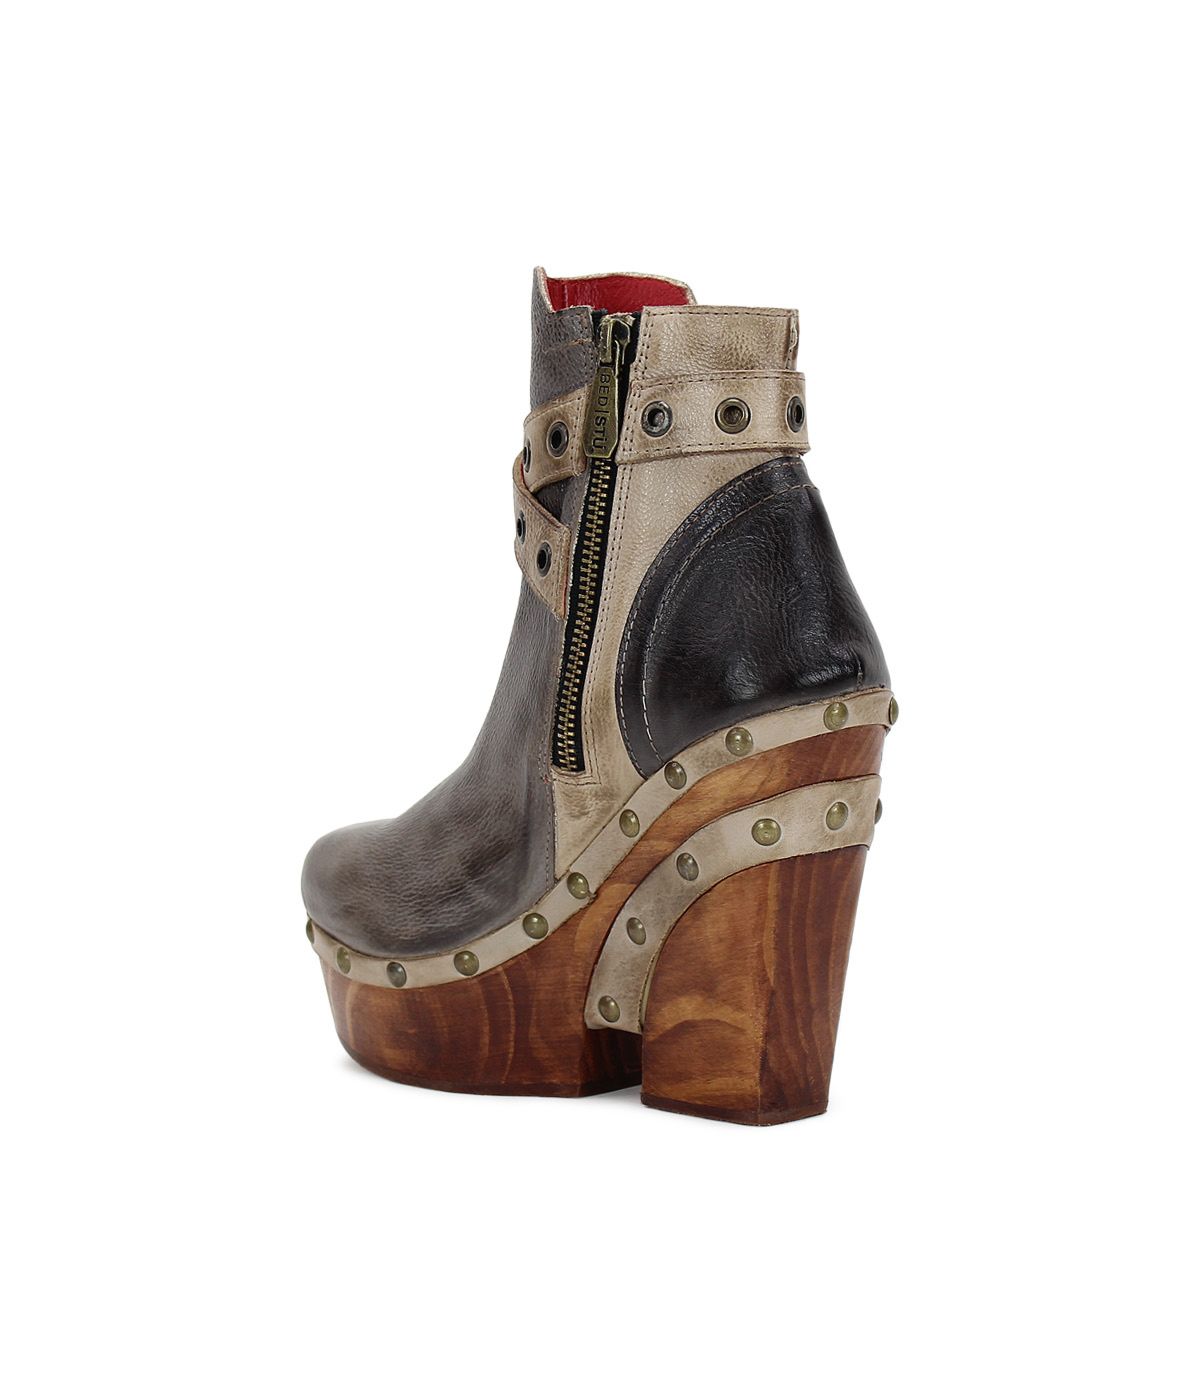 Bed Stü women's shoes, made in Mexico. Tonic Breeze,Dramatic heel, tough straps, metal studs - perfect for concerts. Cushioned insole for comfort. Available at Rustic Chic Boutique Mackinac Island, Michigan.